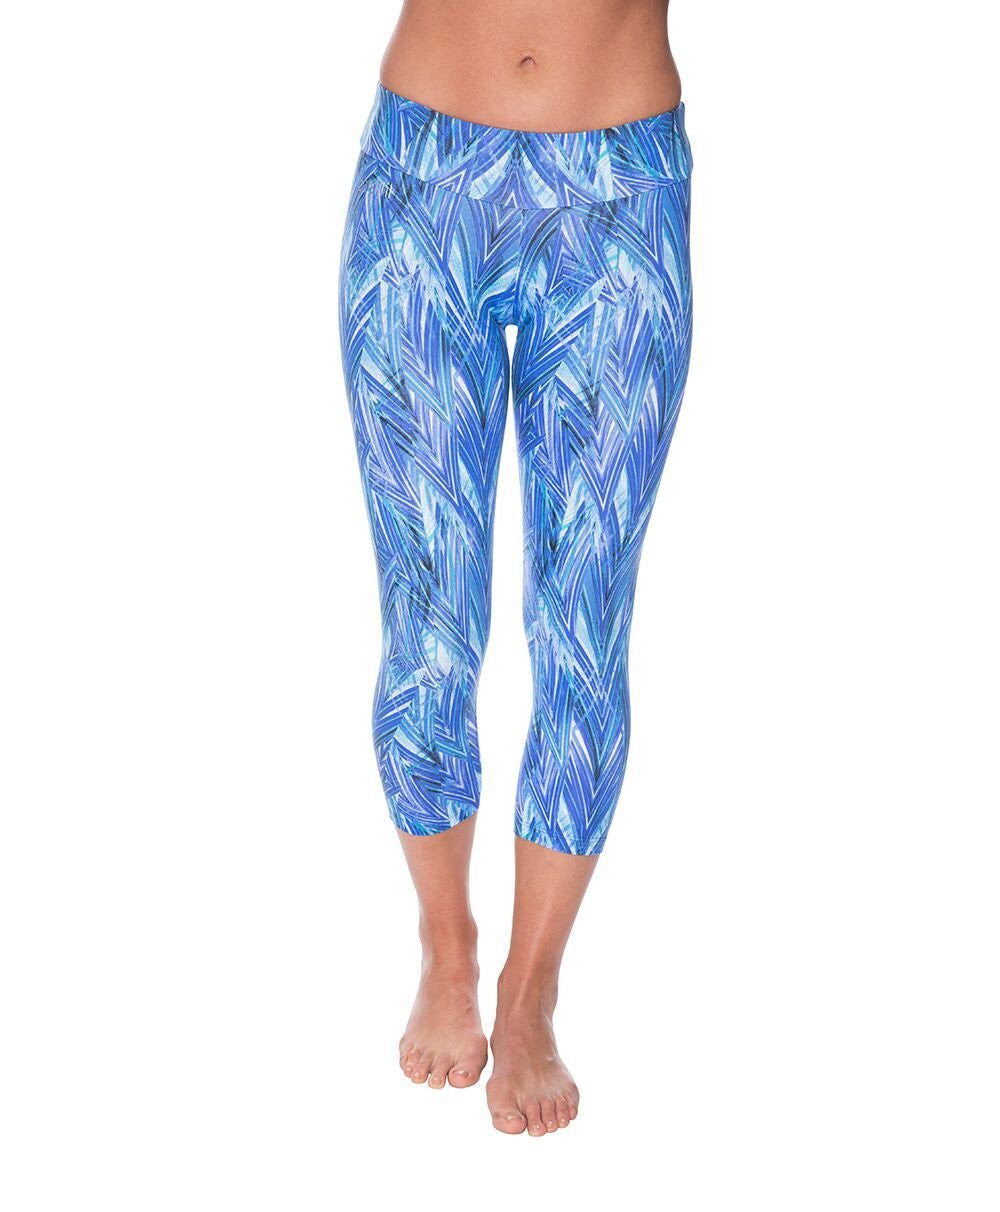 Side view product image for Brasilfit Jodhpur calf length activewear leggings.  Jodhpur leggings are part of our premium printed activewear collection that is focused on performance, high compression activewear with colourful prints.